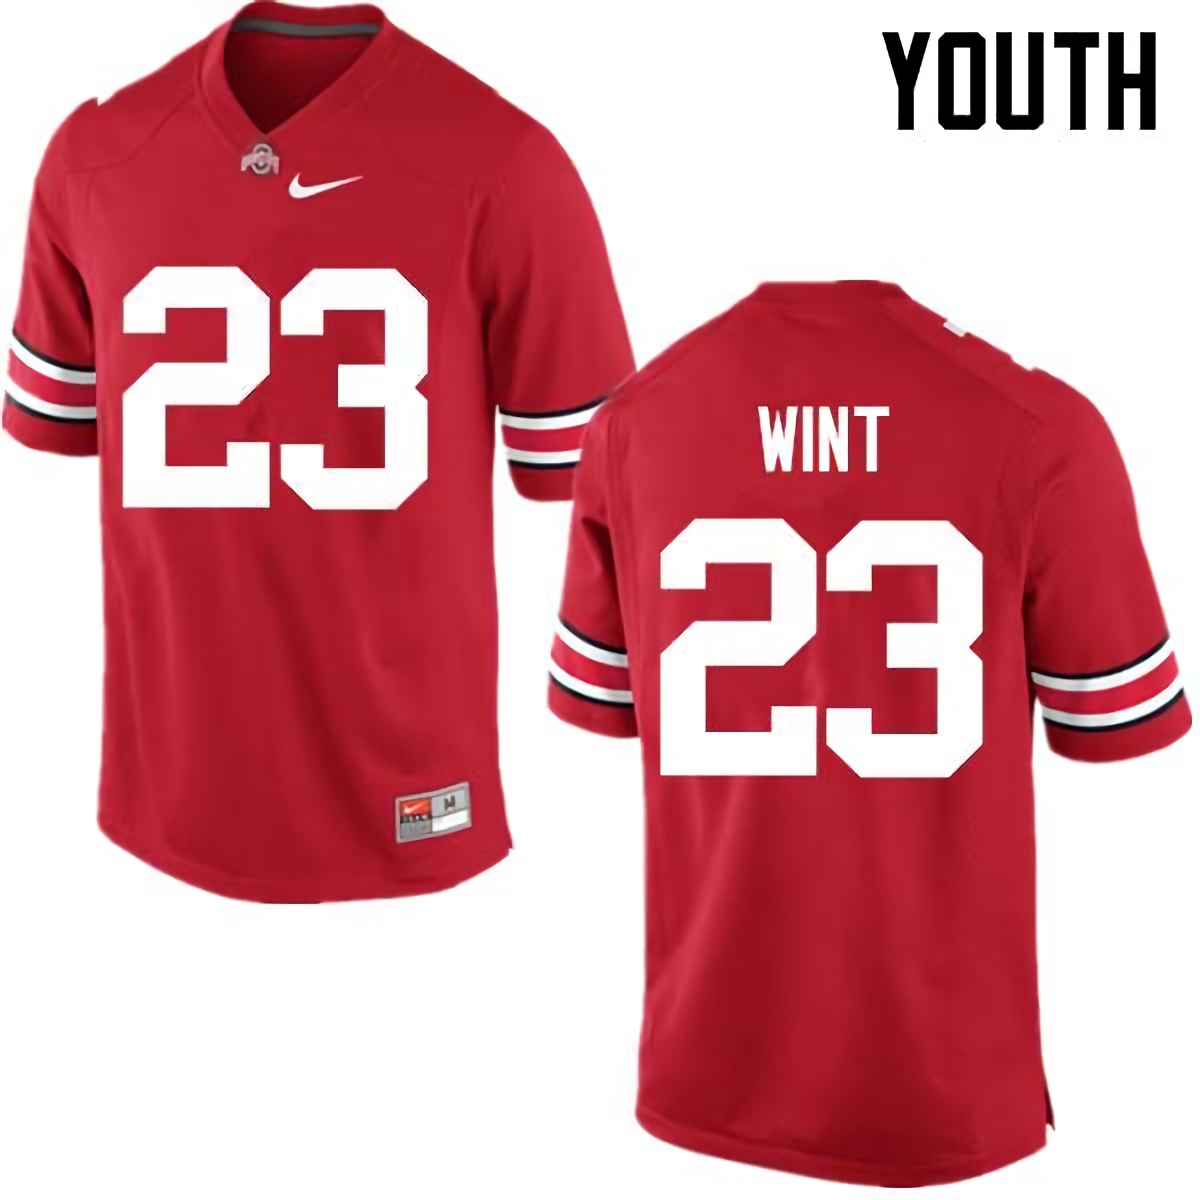 Jahsen Wint Ohio State Buckeyes Youth NCAA #23 Nike Red College Stitched Football Jersey UTH8656UP